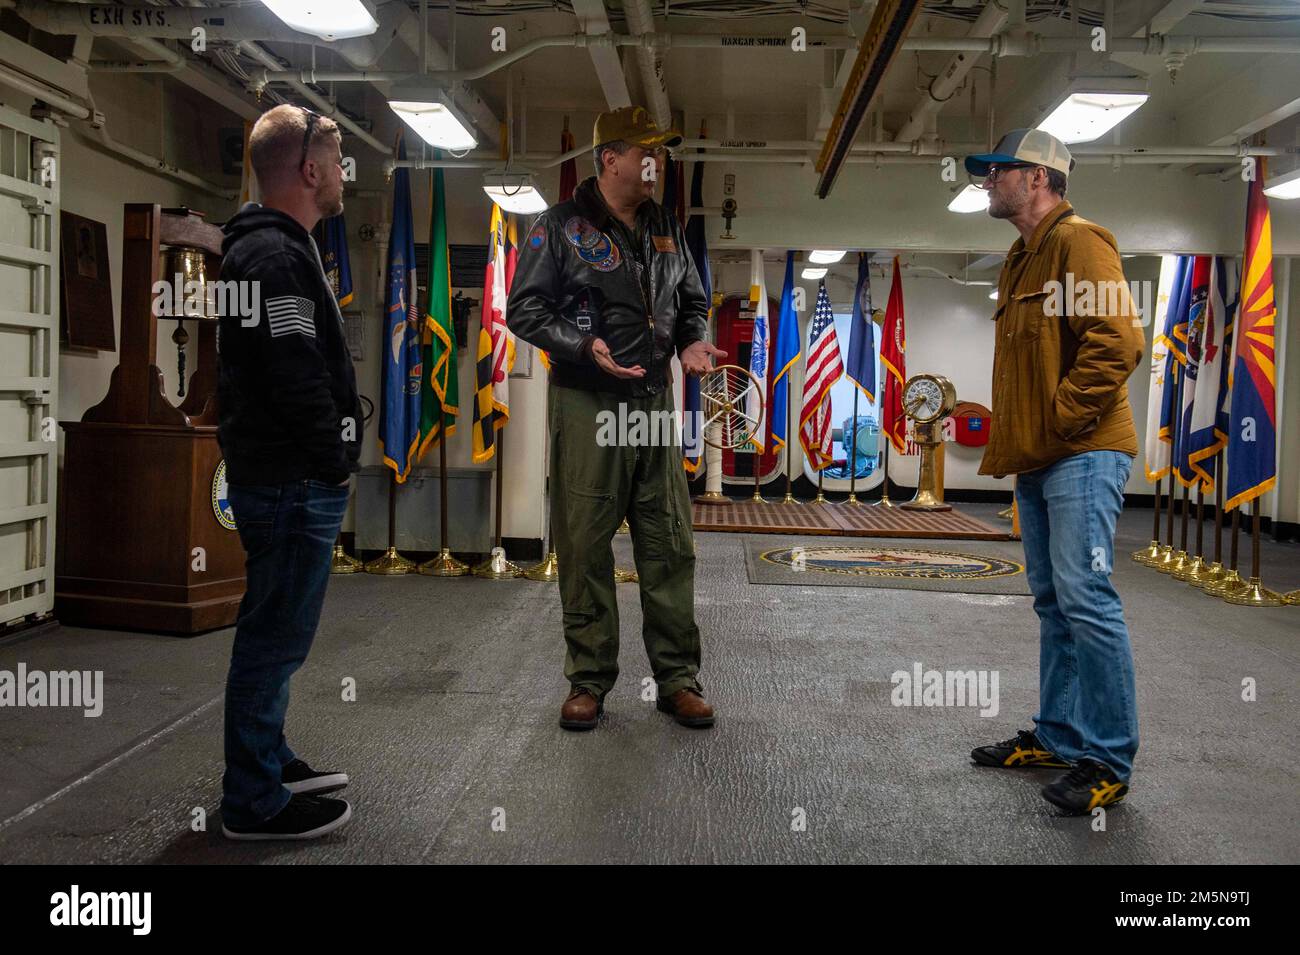 220329-N-OL632-1016 NAVAL STATION NORFOLK (March 29, 2022) Capt. Robert Aguilar, commanding officer of USS George H.W. Bush (CVN 77), talks with NASCAR Hall of Famer Dale Earnhardt Jr. and NASCAR Xfinity Series driver Justin Allgaier during a visit to the ship, March 29, 2022. George H.W. Bush provides the national command authority flexible, tailorable war fighting capability as the flagship of the carrier strike group which maintains maritime stability and security in order to ensure access, deter aggression and defend U.S., allied and partner interests. Stock Photo